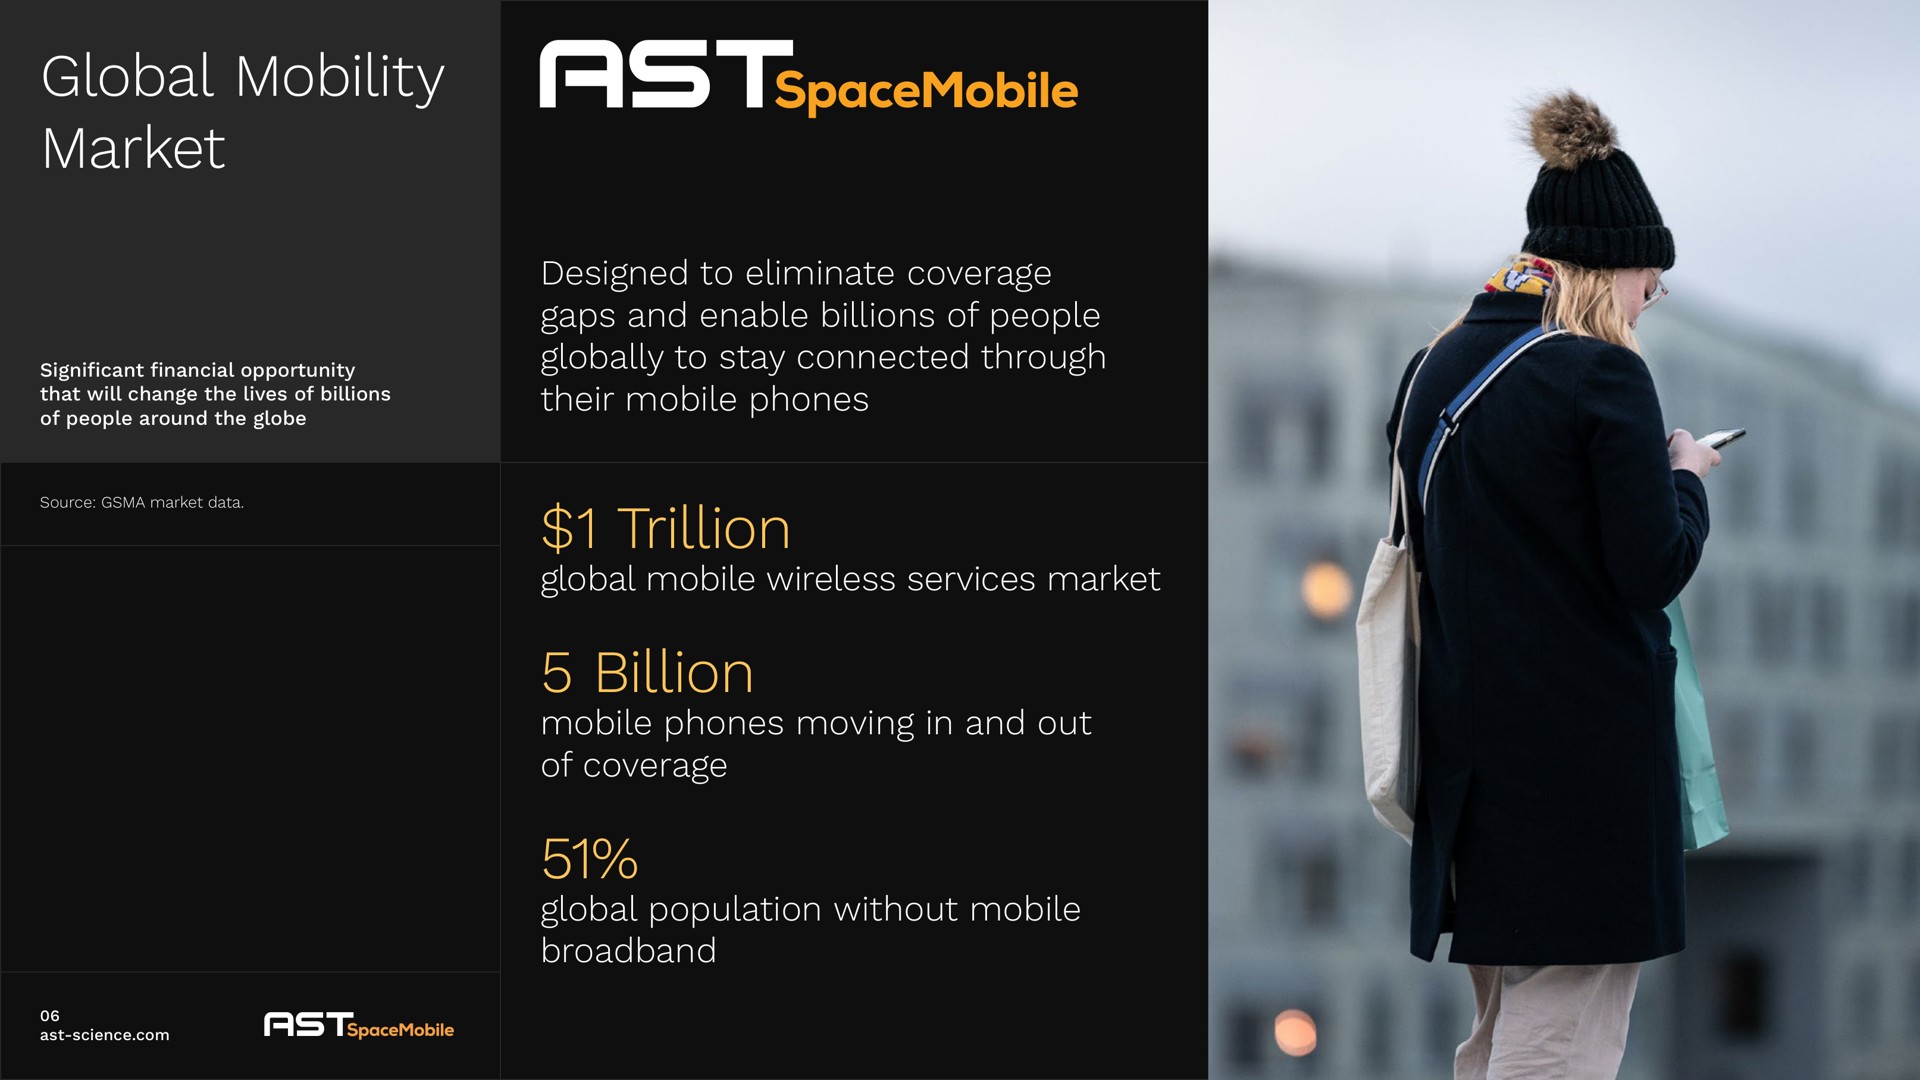 global mobility market designed to eliminate coverage gaps and enable billions of people globally to stay connected through their mobile phones trillion global mobile wireless services market billion mobile phones moving in and out of coverage global population without mobile | AST SpaceMobile